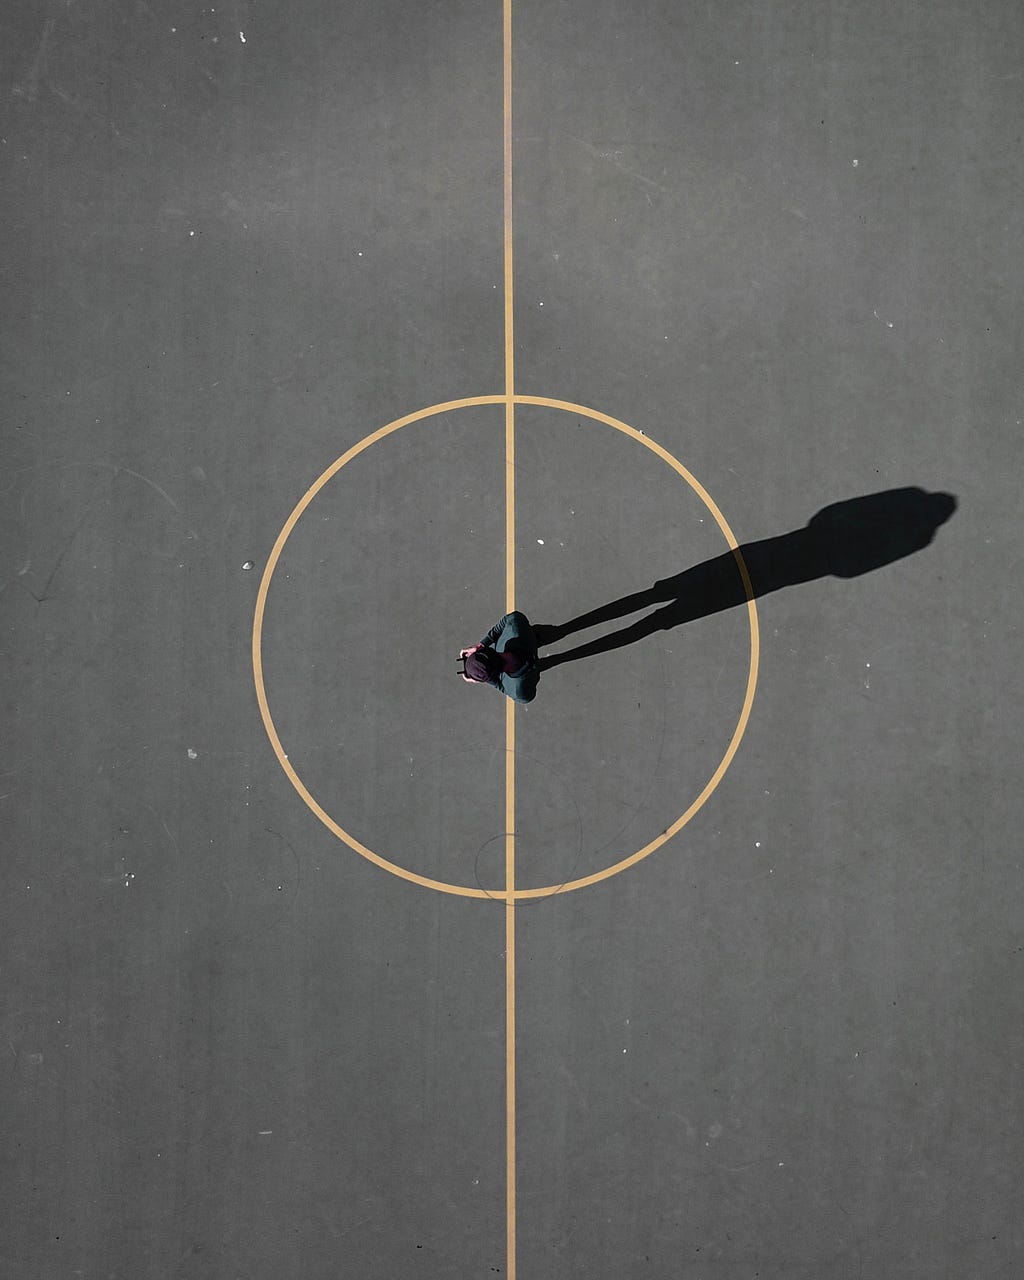 An aerial photo of a person stood in the centre of a tarmac basketball court. A long shadow is cast by the sunlight, which projects the figure’s shadow.